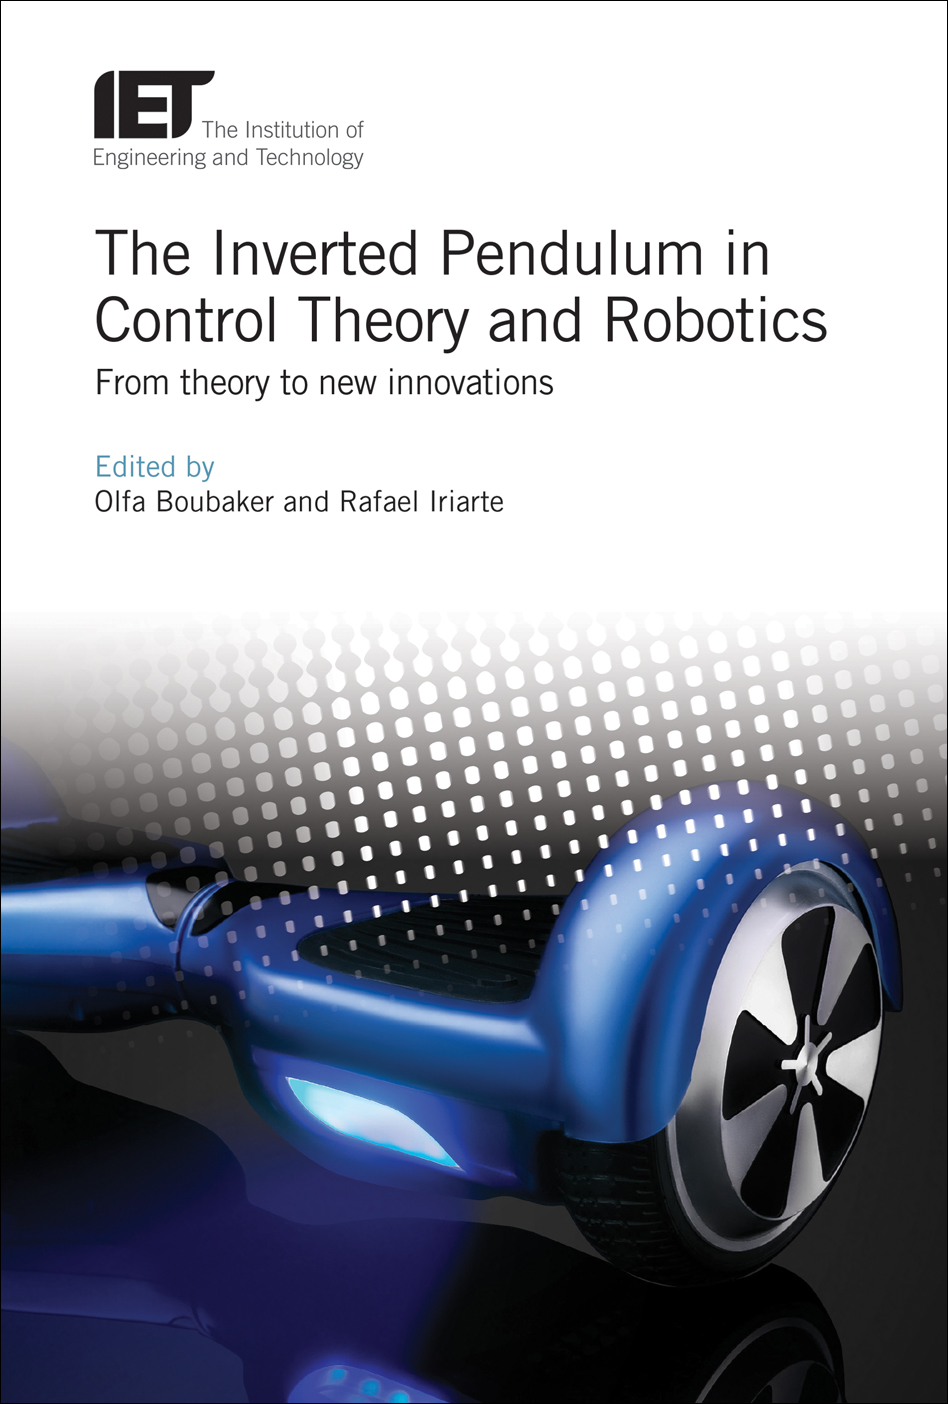 The Inverted Pendulum in Control Theory and Robotics, From theory to new innovations